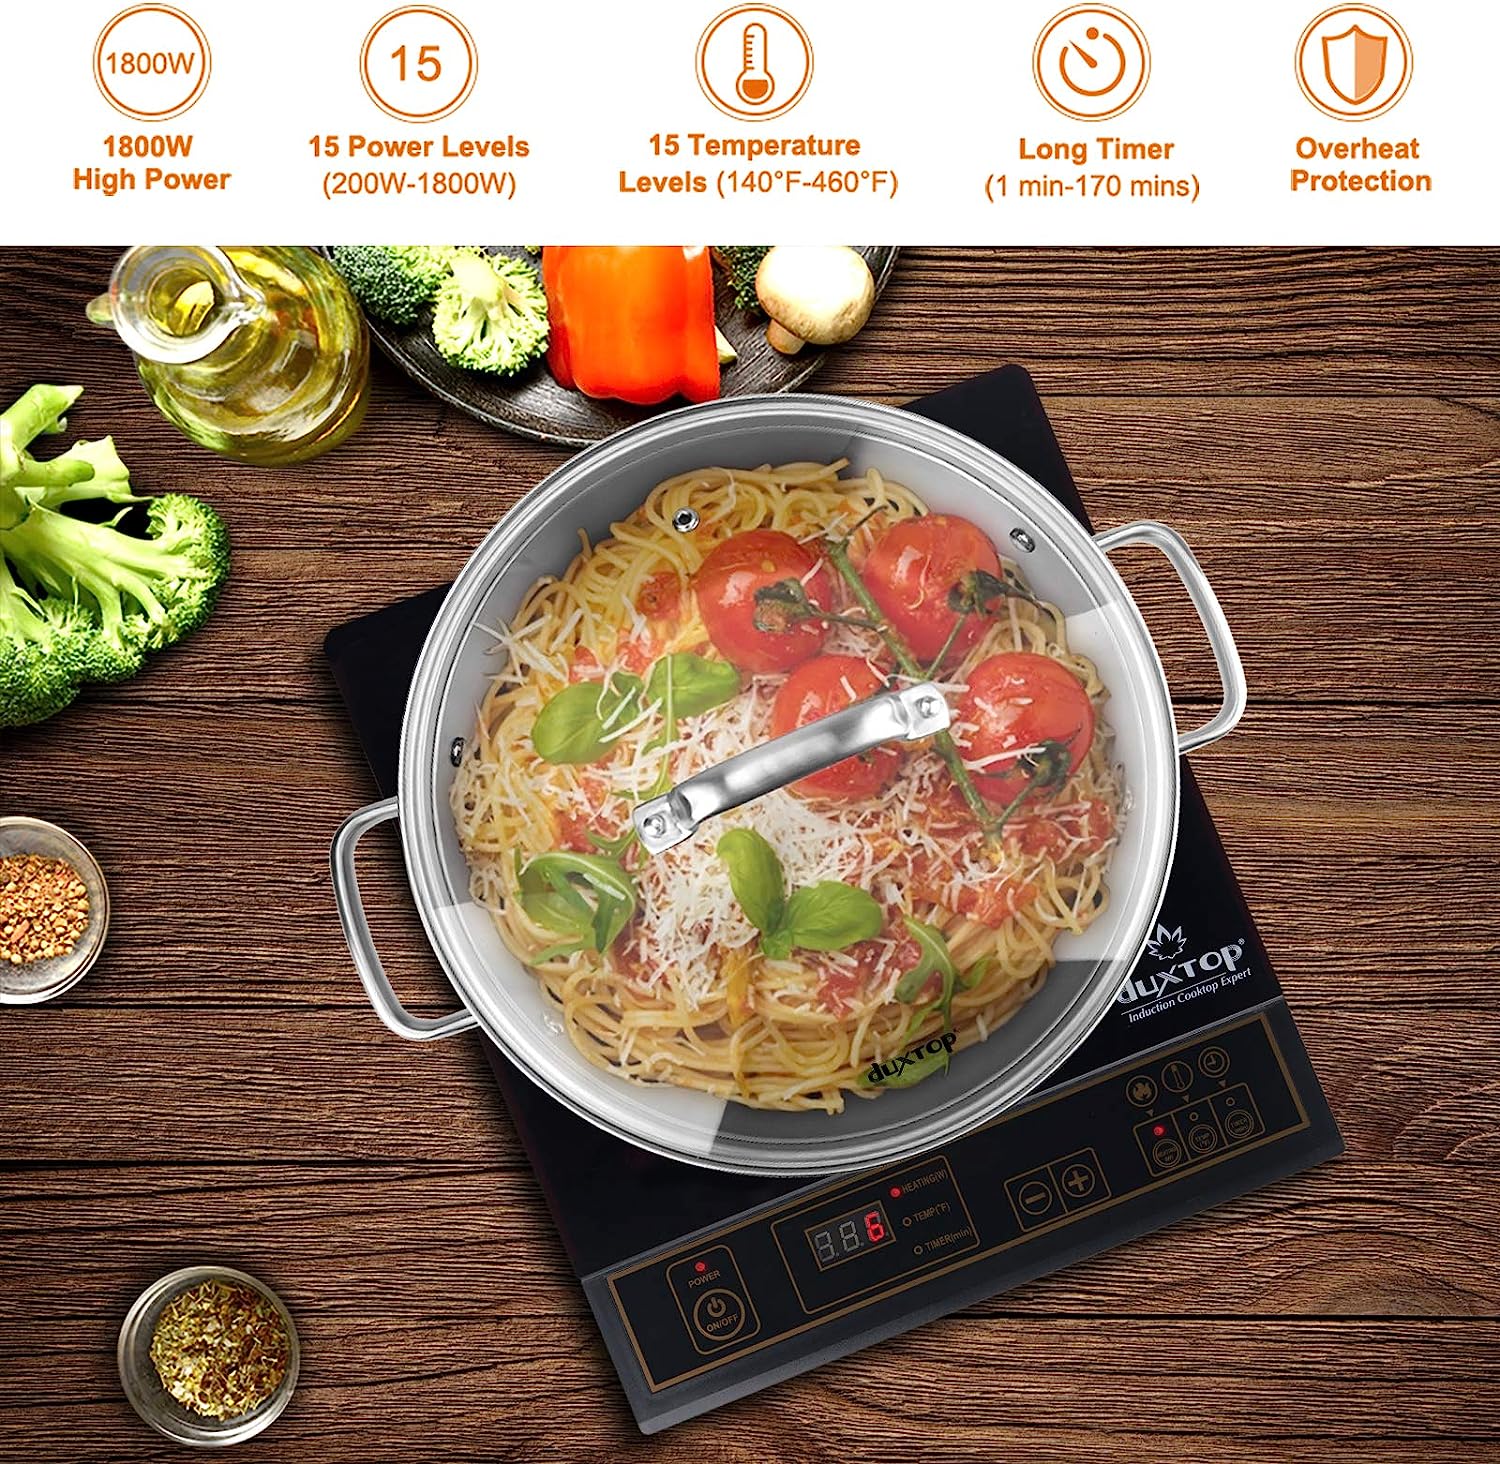 https://bigbigmart.com/wp-content/uploads/2023/07/Duxtop-1800W-Portable-Induction-Cooktop-Countertop-Burner-Included-5.7-Quarts-Professional-Stainless-Steel-Cooking-Pot-with-Lid-Heavy-Impact-bonded-Bottom1.jpg